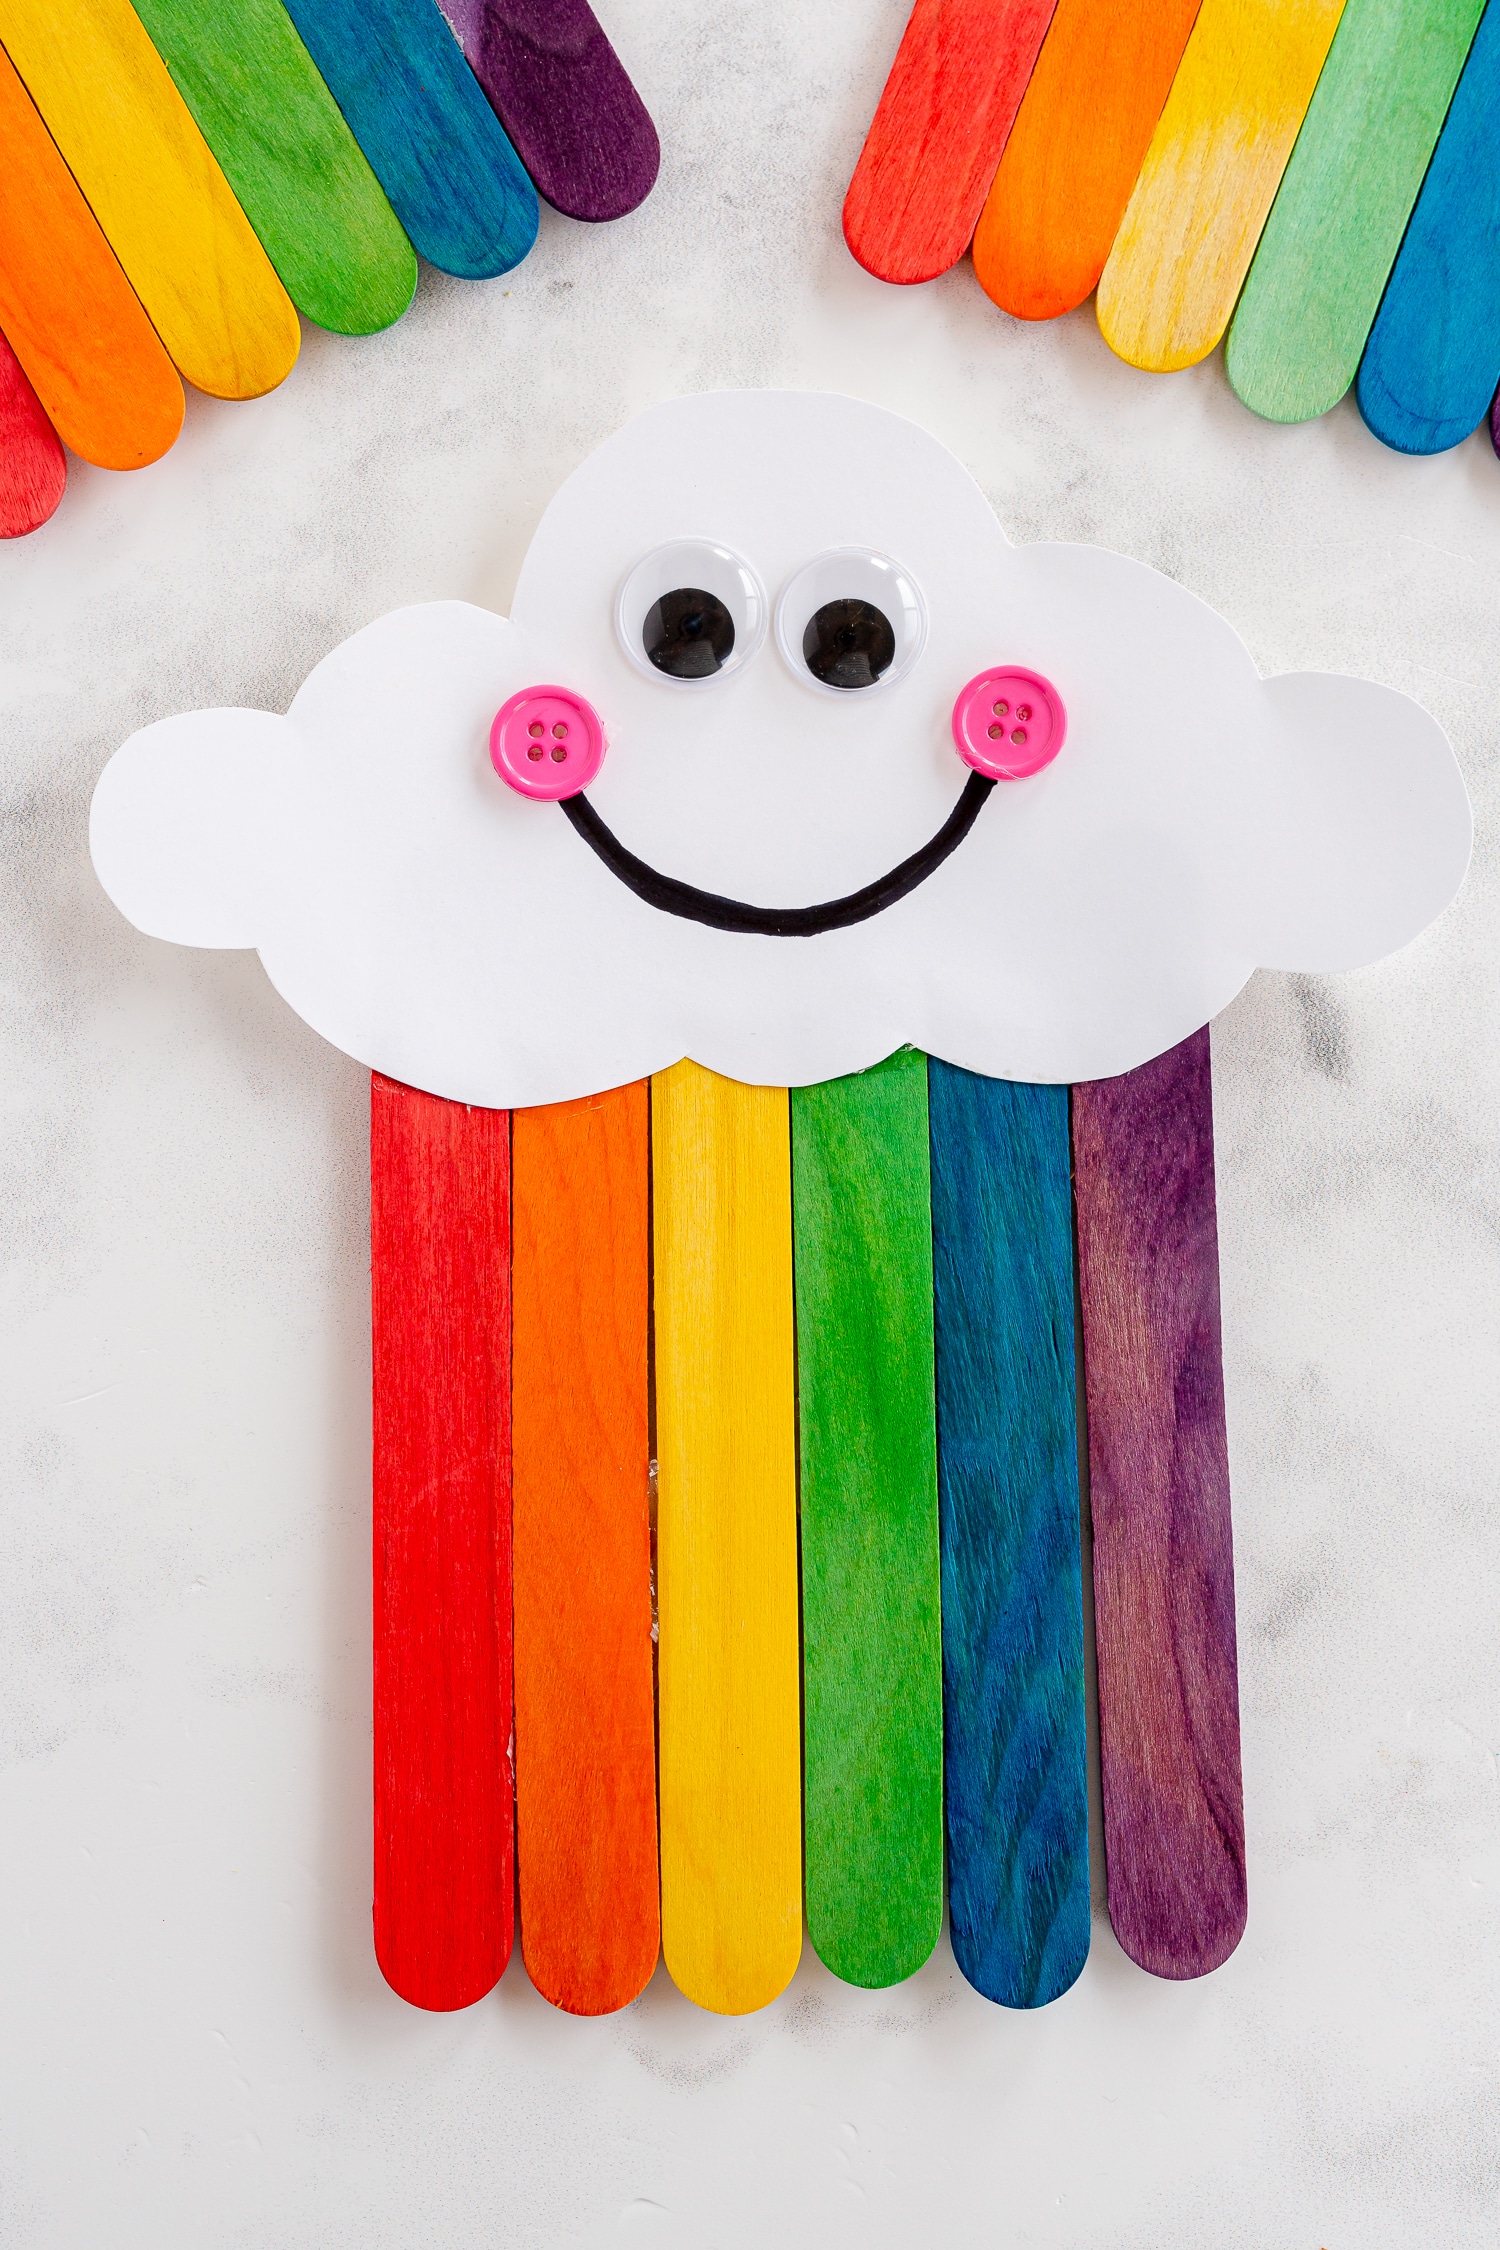 Rainbow Popsicle Stick Craft on Table